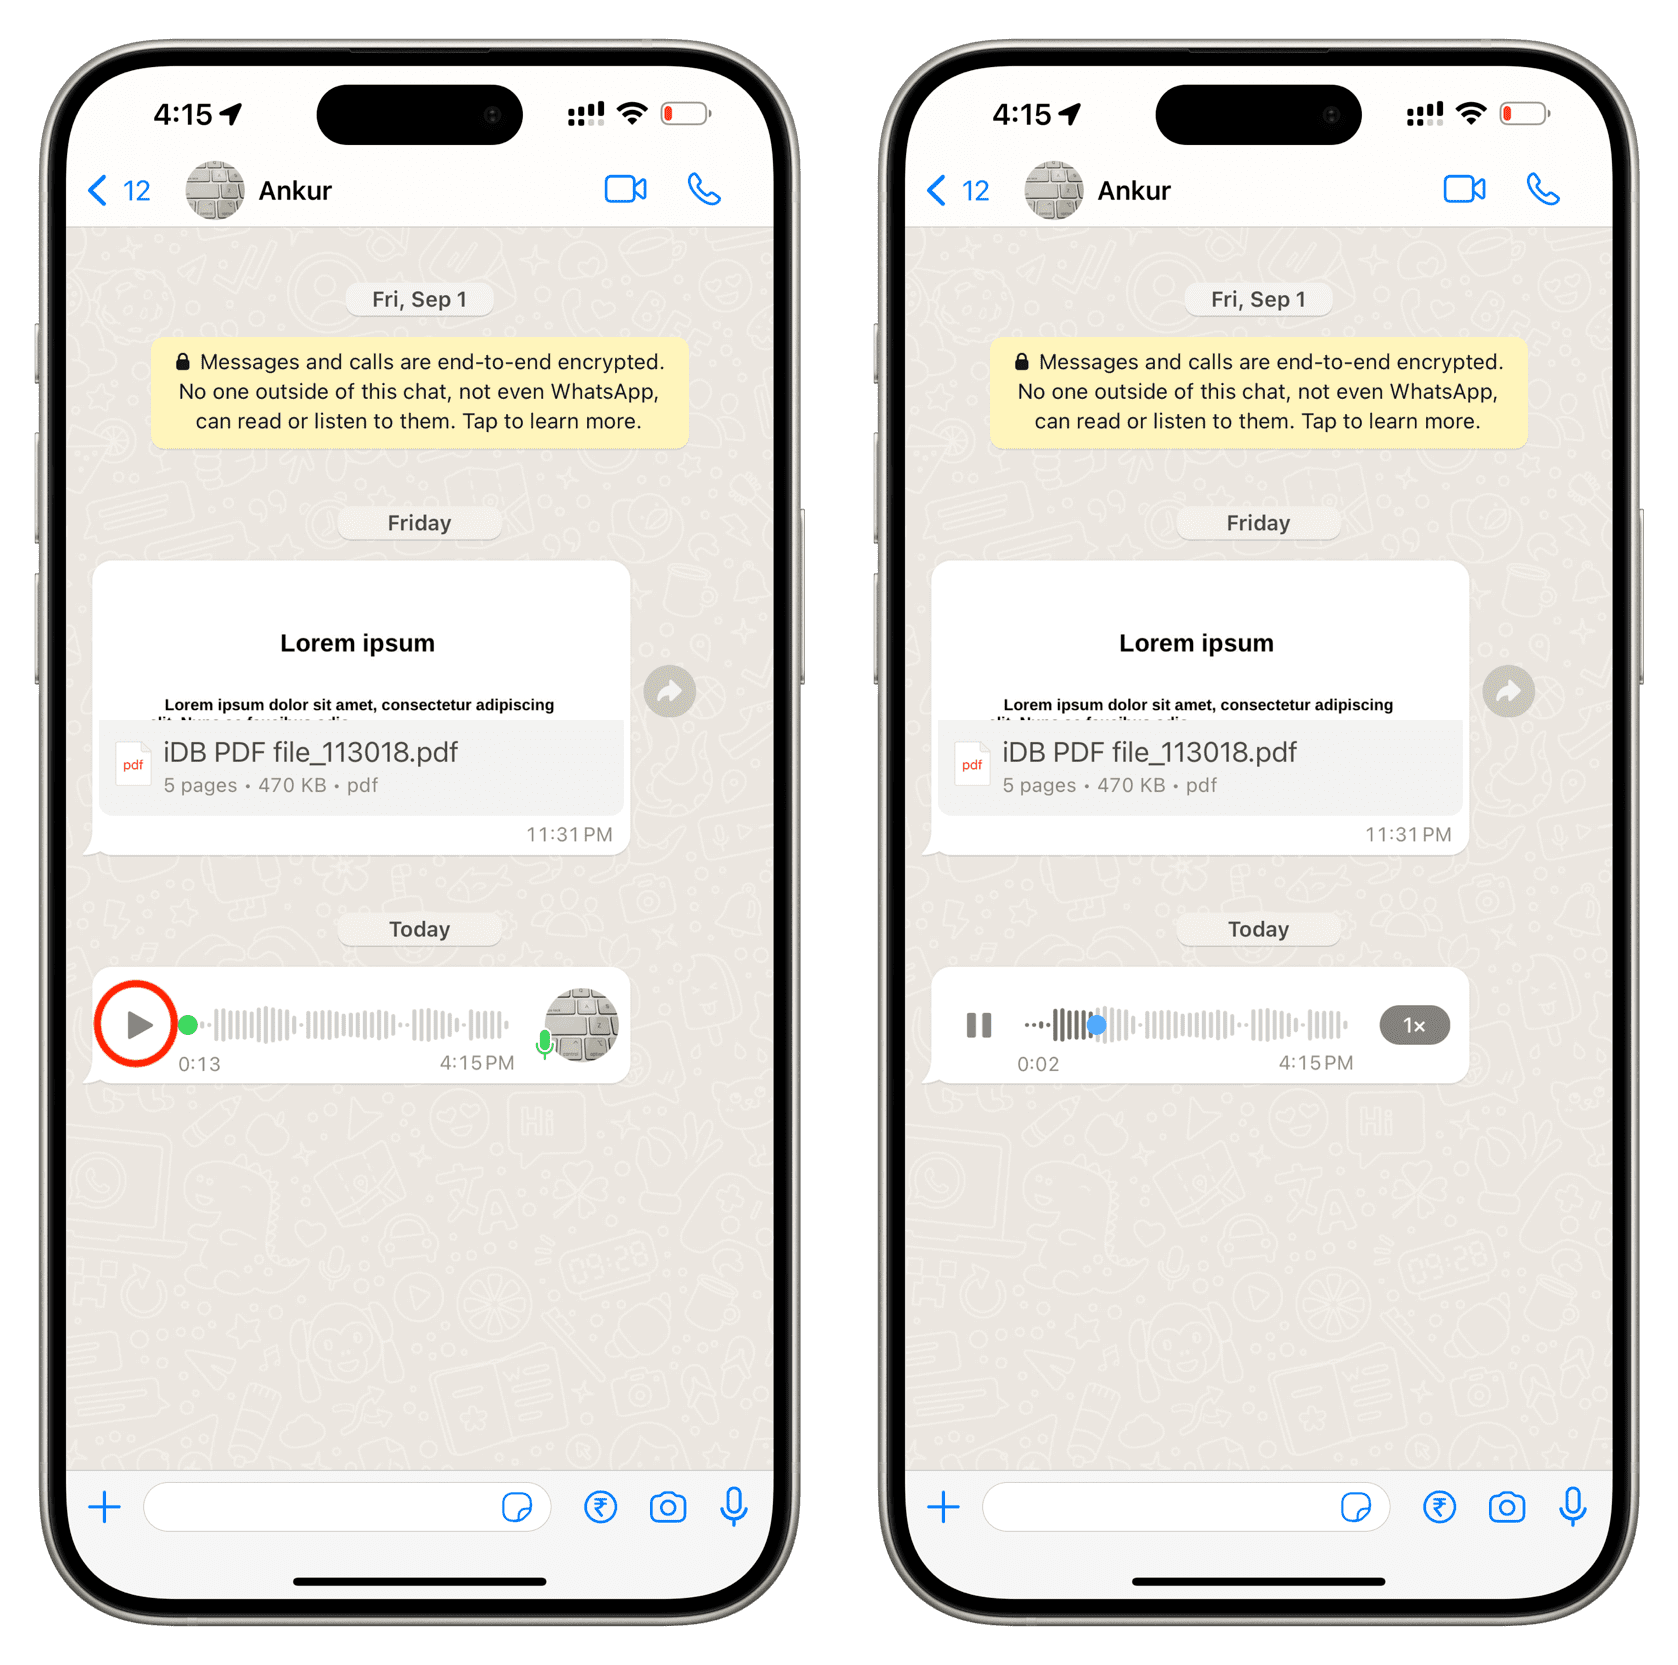 Play received WhatsApp audio message on iPhone